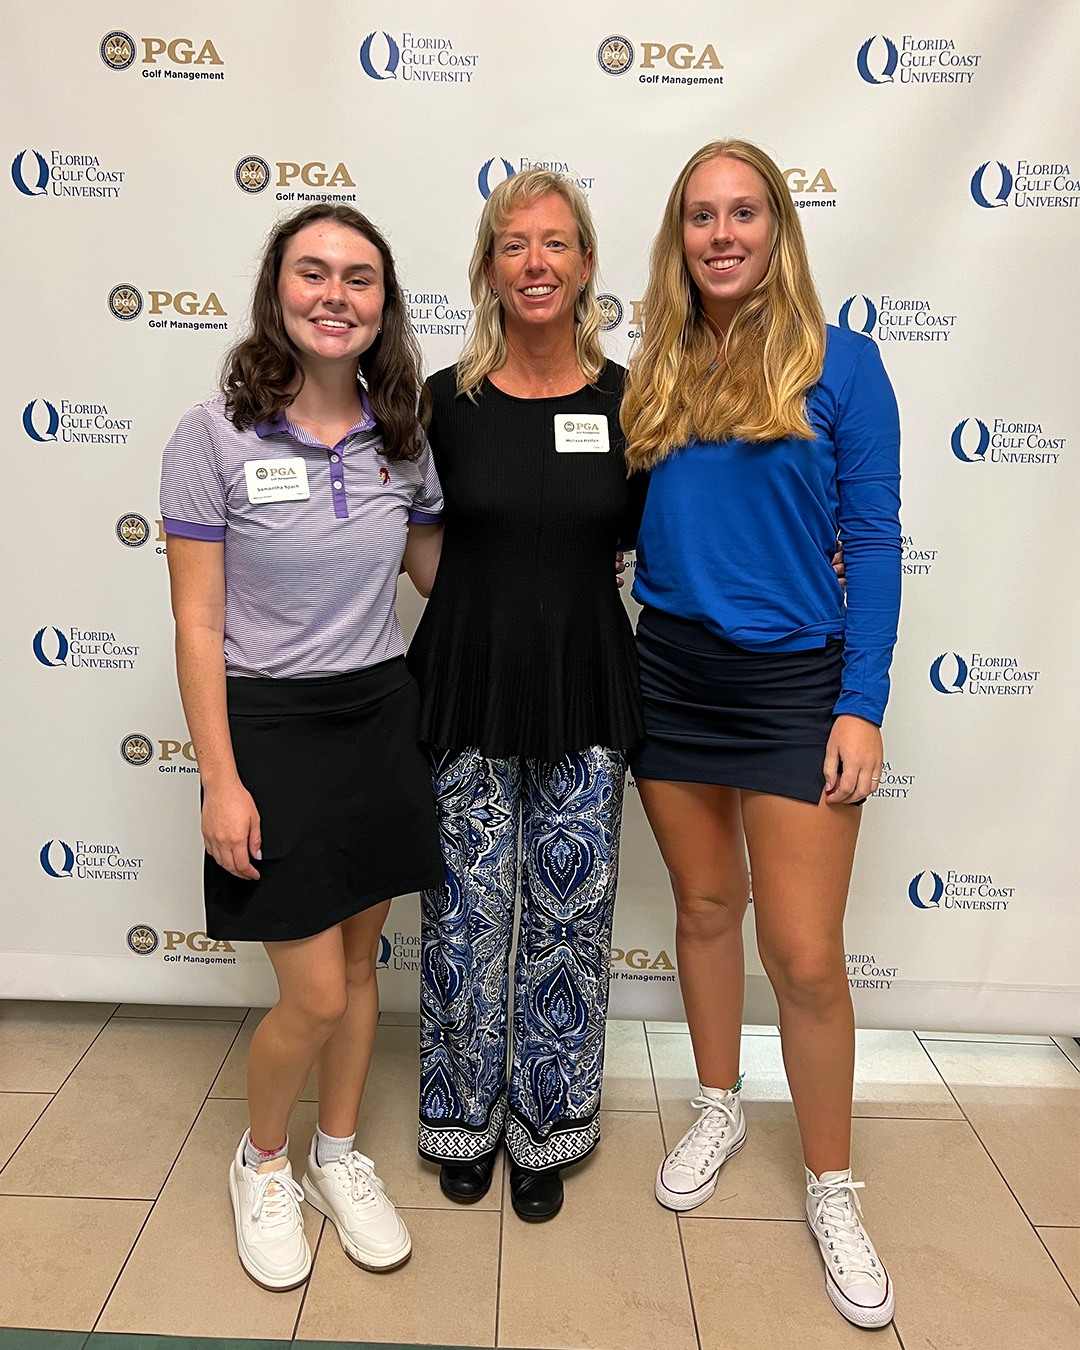 Samantha Spach, Melissa Hatten, PGA, and Leonie Wulfers at the Kick Off. 